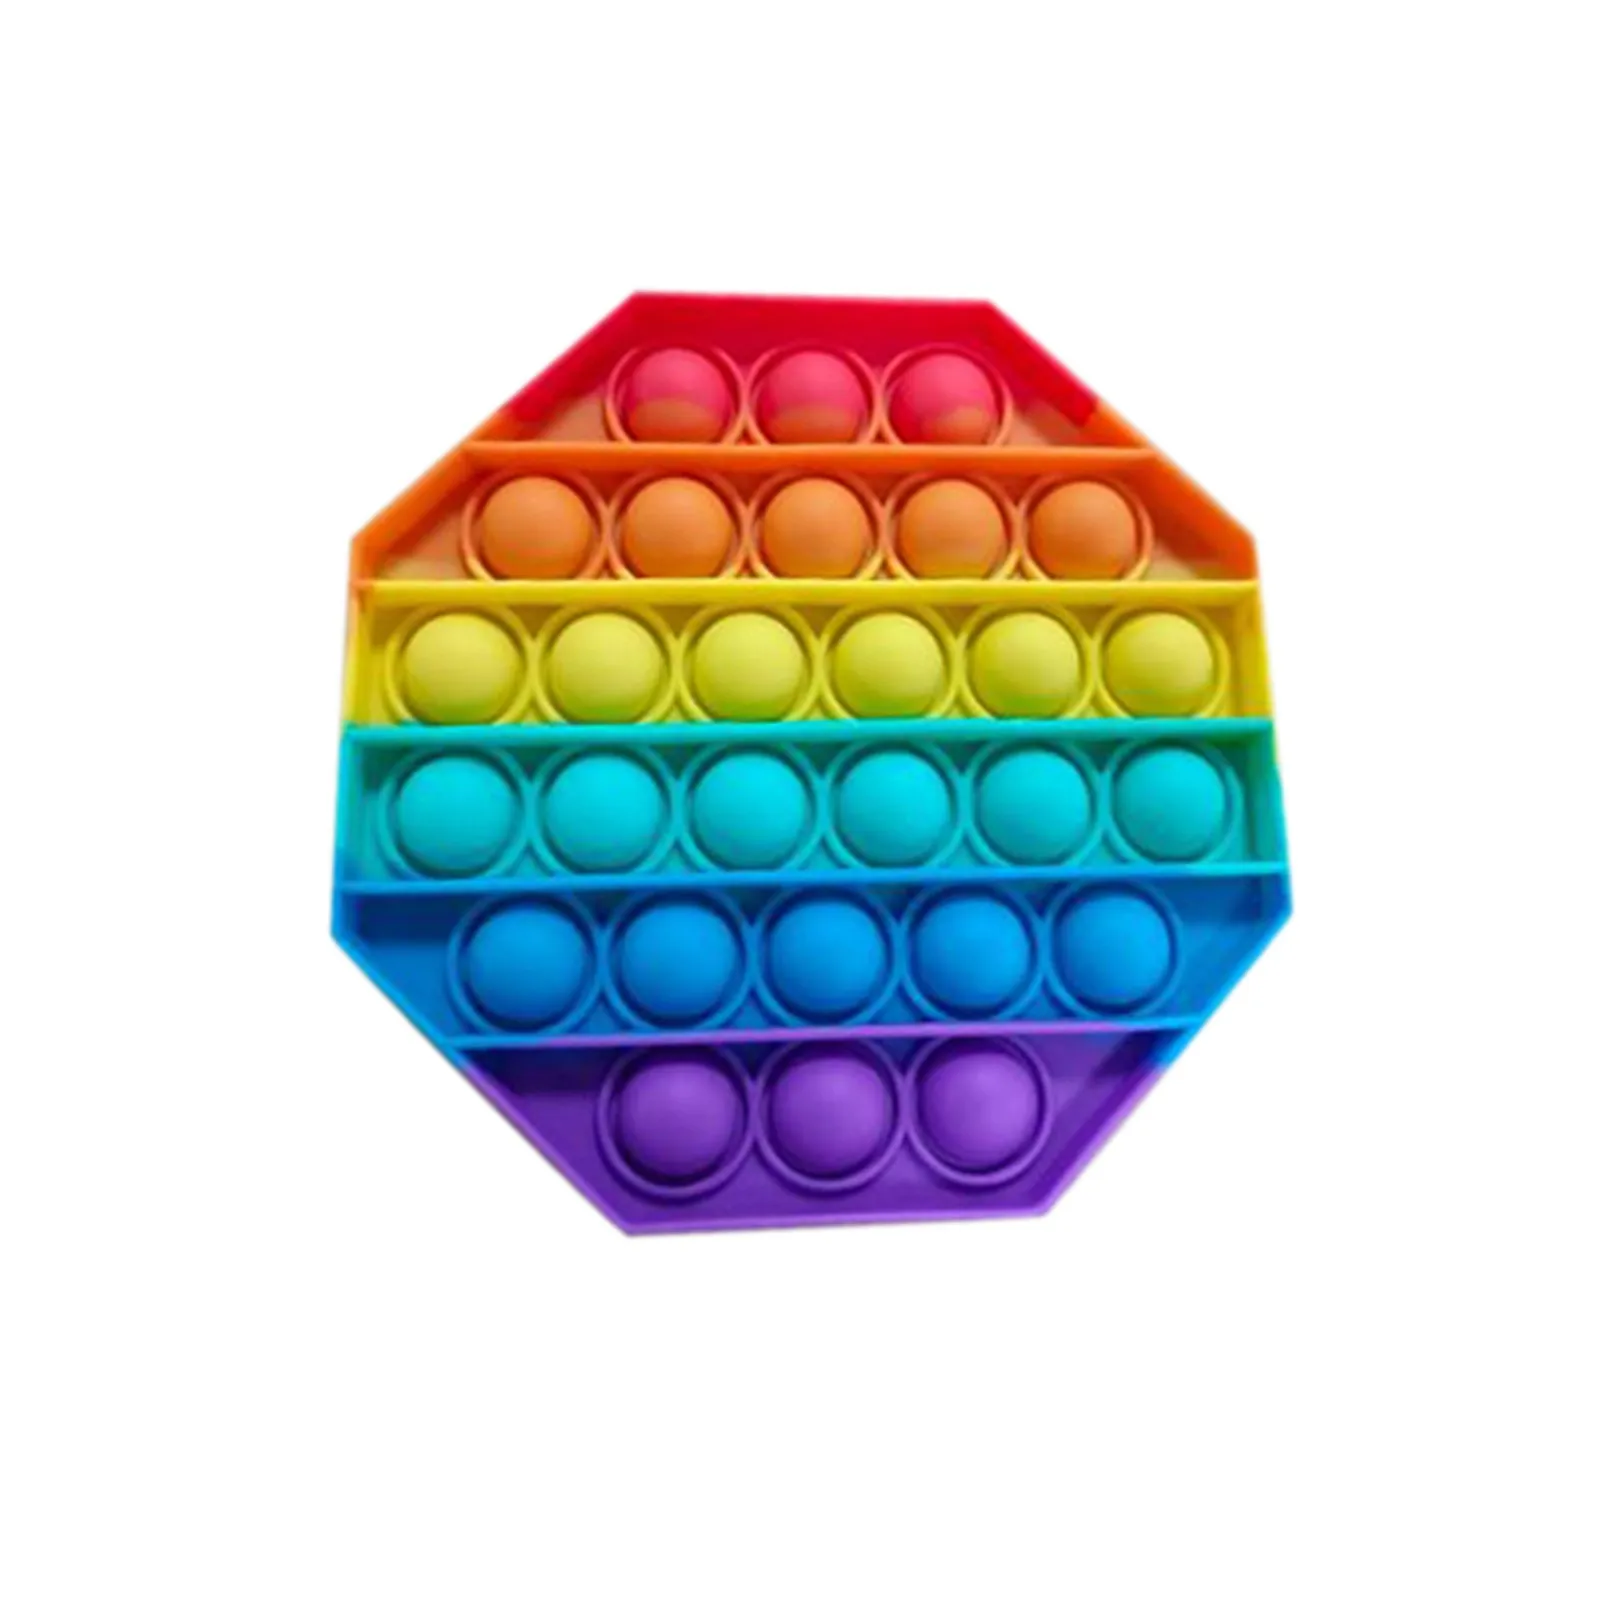 Game Handle Fidget Toys Pack Its Square Antistress New Push Bubble Rainbow Pop For Hands Squishy Reliver Stress For Kids Антистр fidget snapper Squeeze Toys